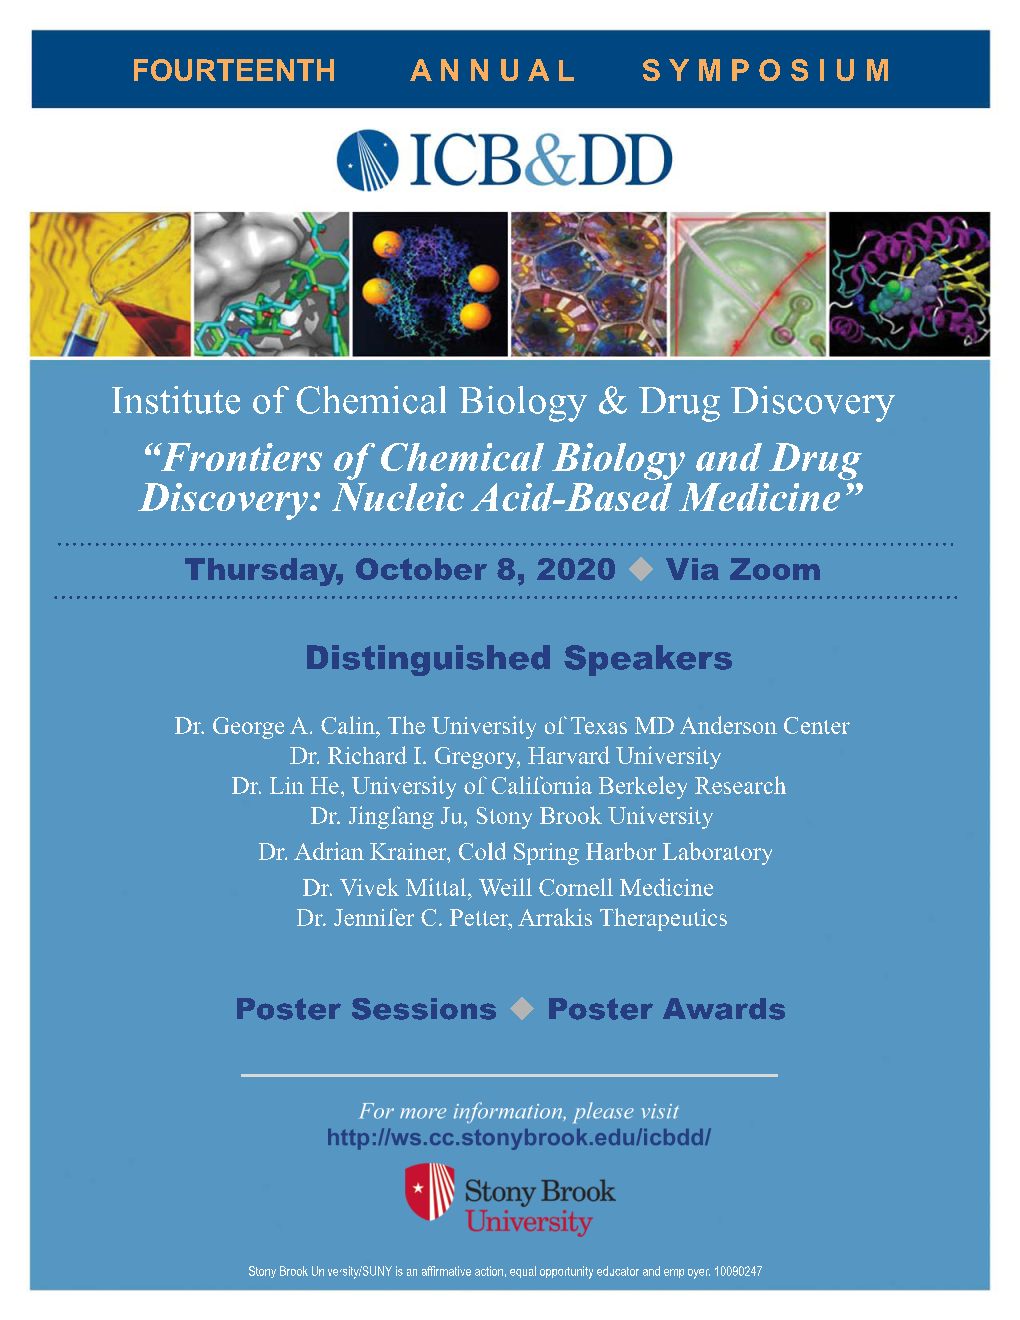 Frontiers of Chemical Biology and Drug Discovery: Nucleic Acid-Based Medicine”